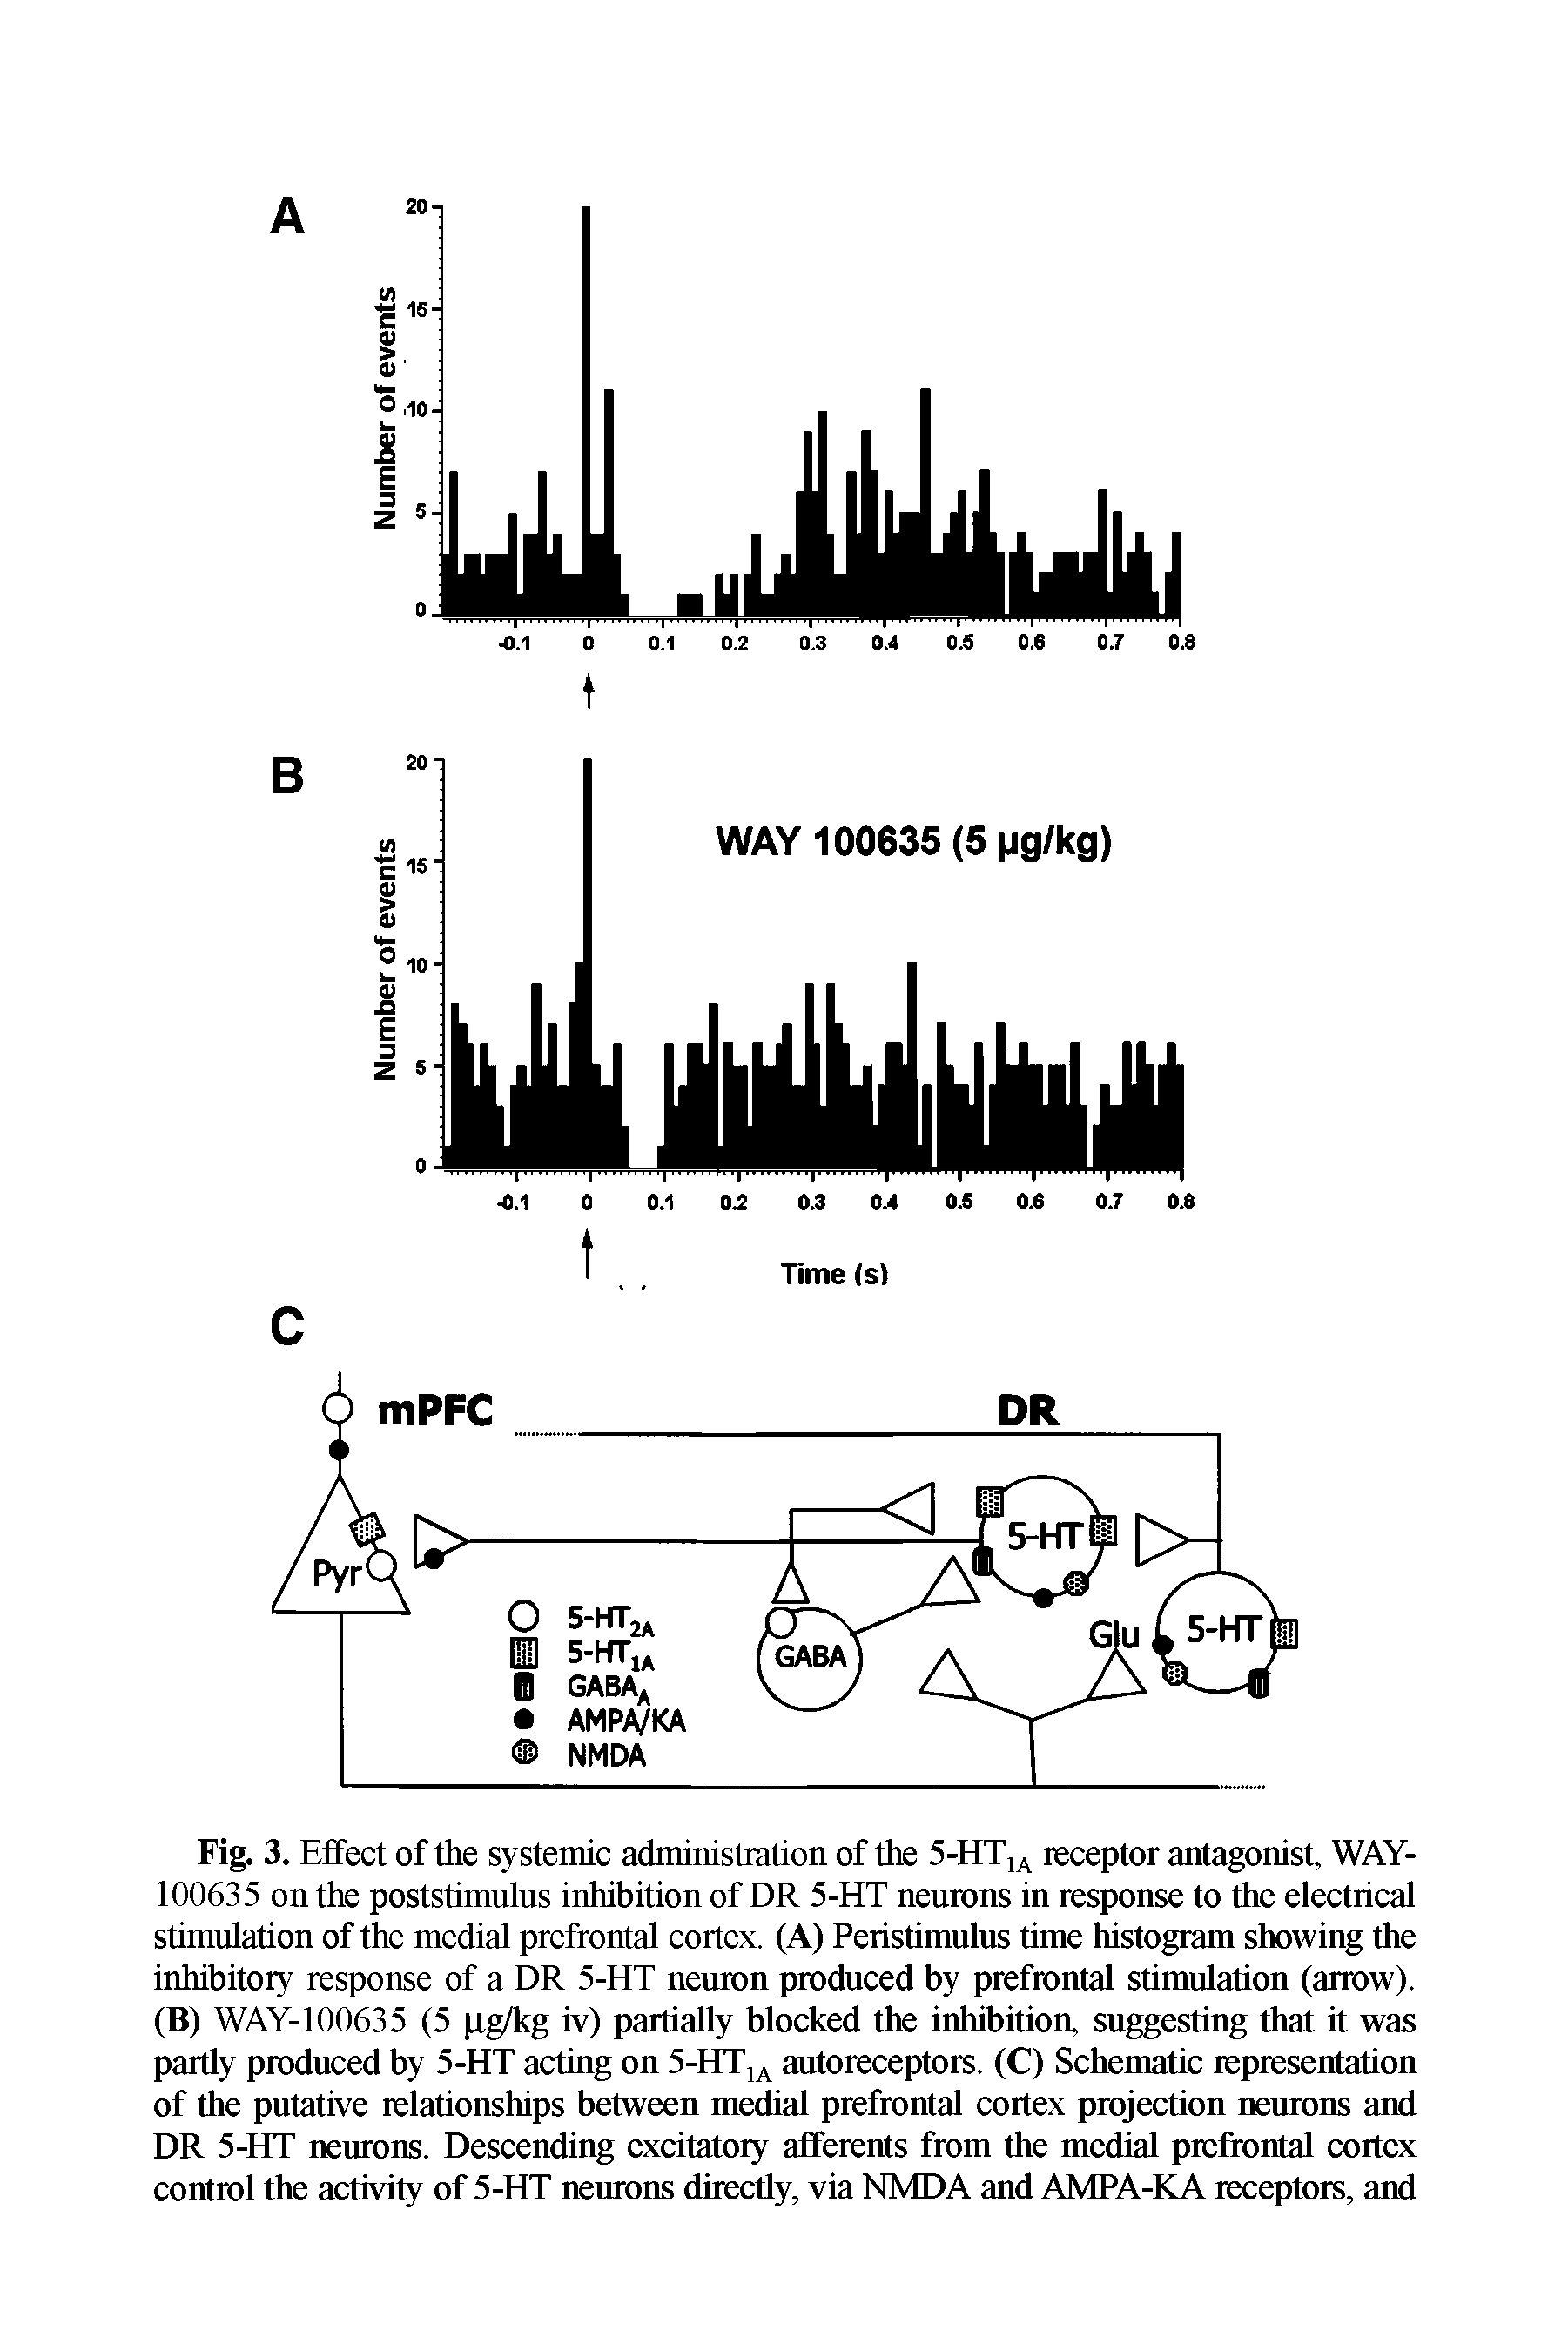 Fig. 3. Effect of the systemic administration of the 5-HT1A receptor antagonist, WAY-100635 on the poststimulus inhibition of DR 5-HT neurons in response to the electrical stimulation of the medial prefrontal cortex. (A) Peristimulus time histogram showing the inhibitory response of a DR 5-HT neuron produced by prefrontal stimulation (arrow). (B) WAY-10063 5 (5 pg/kg iv) partially blocked the inhibition, suggesting that it was partly produced by 5-HT acting on 5-HT1A autoreceptors. (C) Schematic representation of the putative relationships between medial prefrontal cortex projection neurons and DR 5-HT neurons. Descending excitatory afferents from the medial prefrontal cortex control the activity of 5-HT neurons directly, via NMDA and AMPA-KA receptors, and...